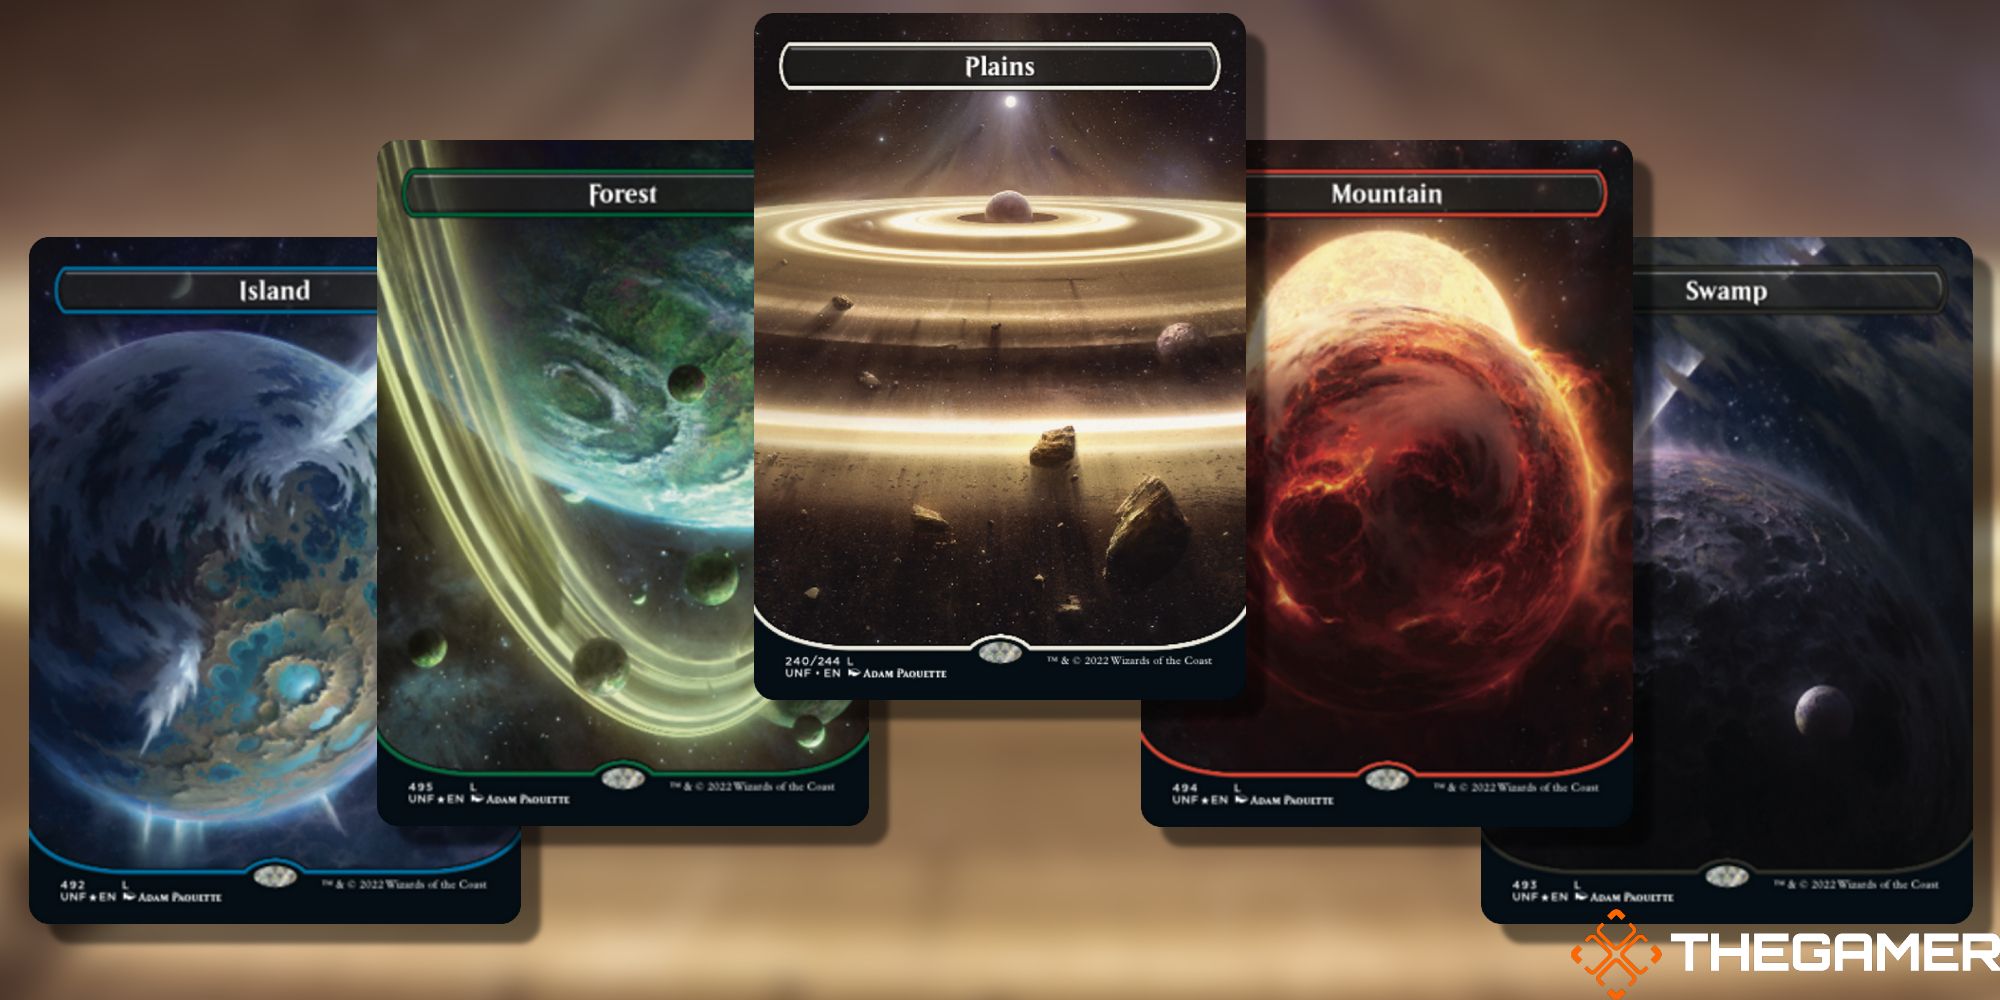 Image of the Basic Lands cards in Magic: The Gathering, with art by Adam Paquette